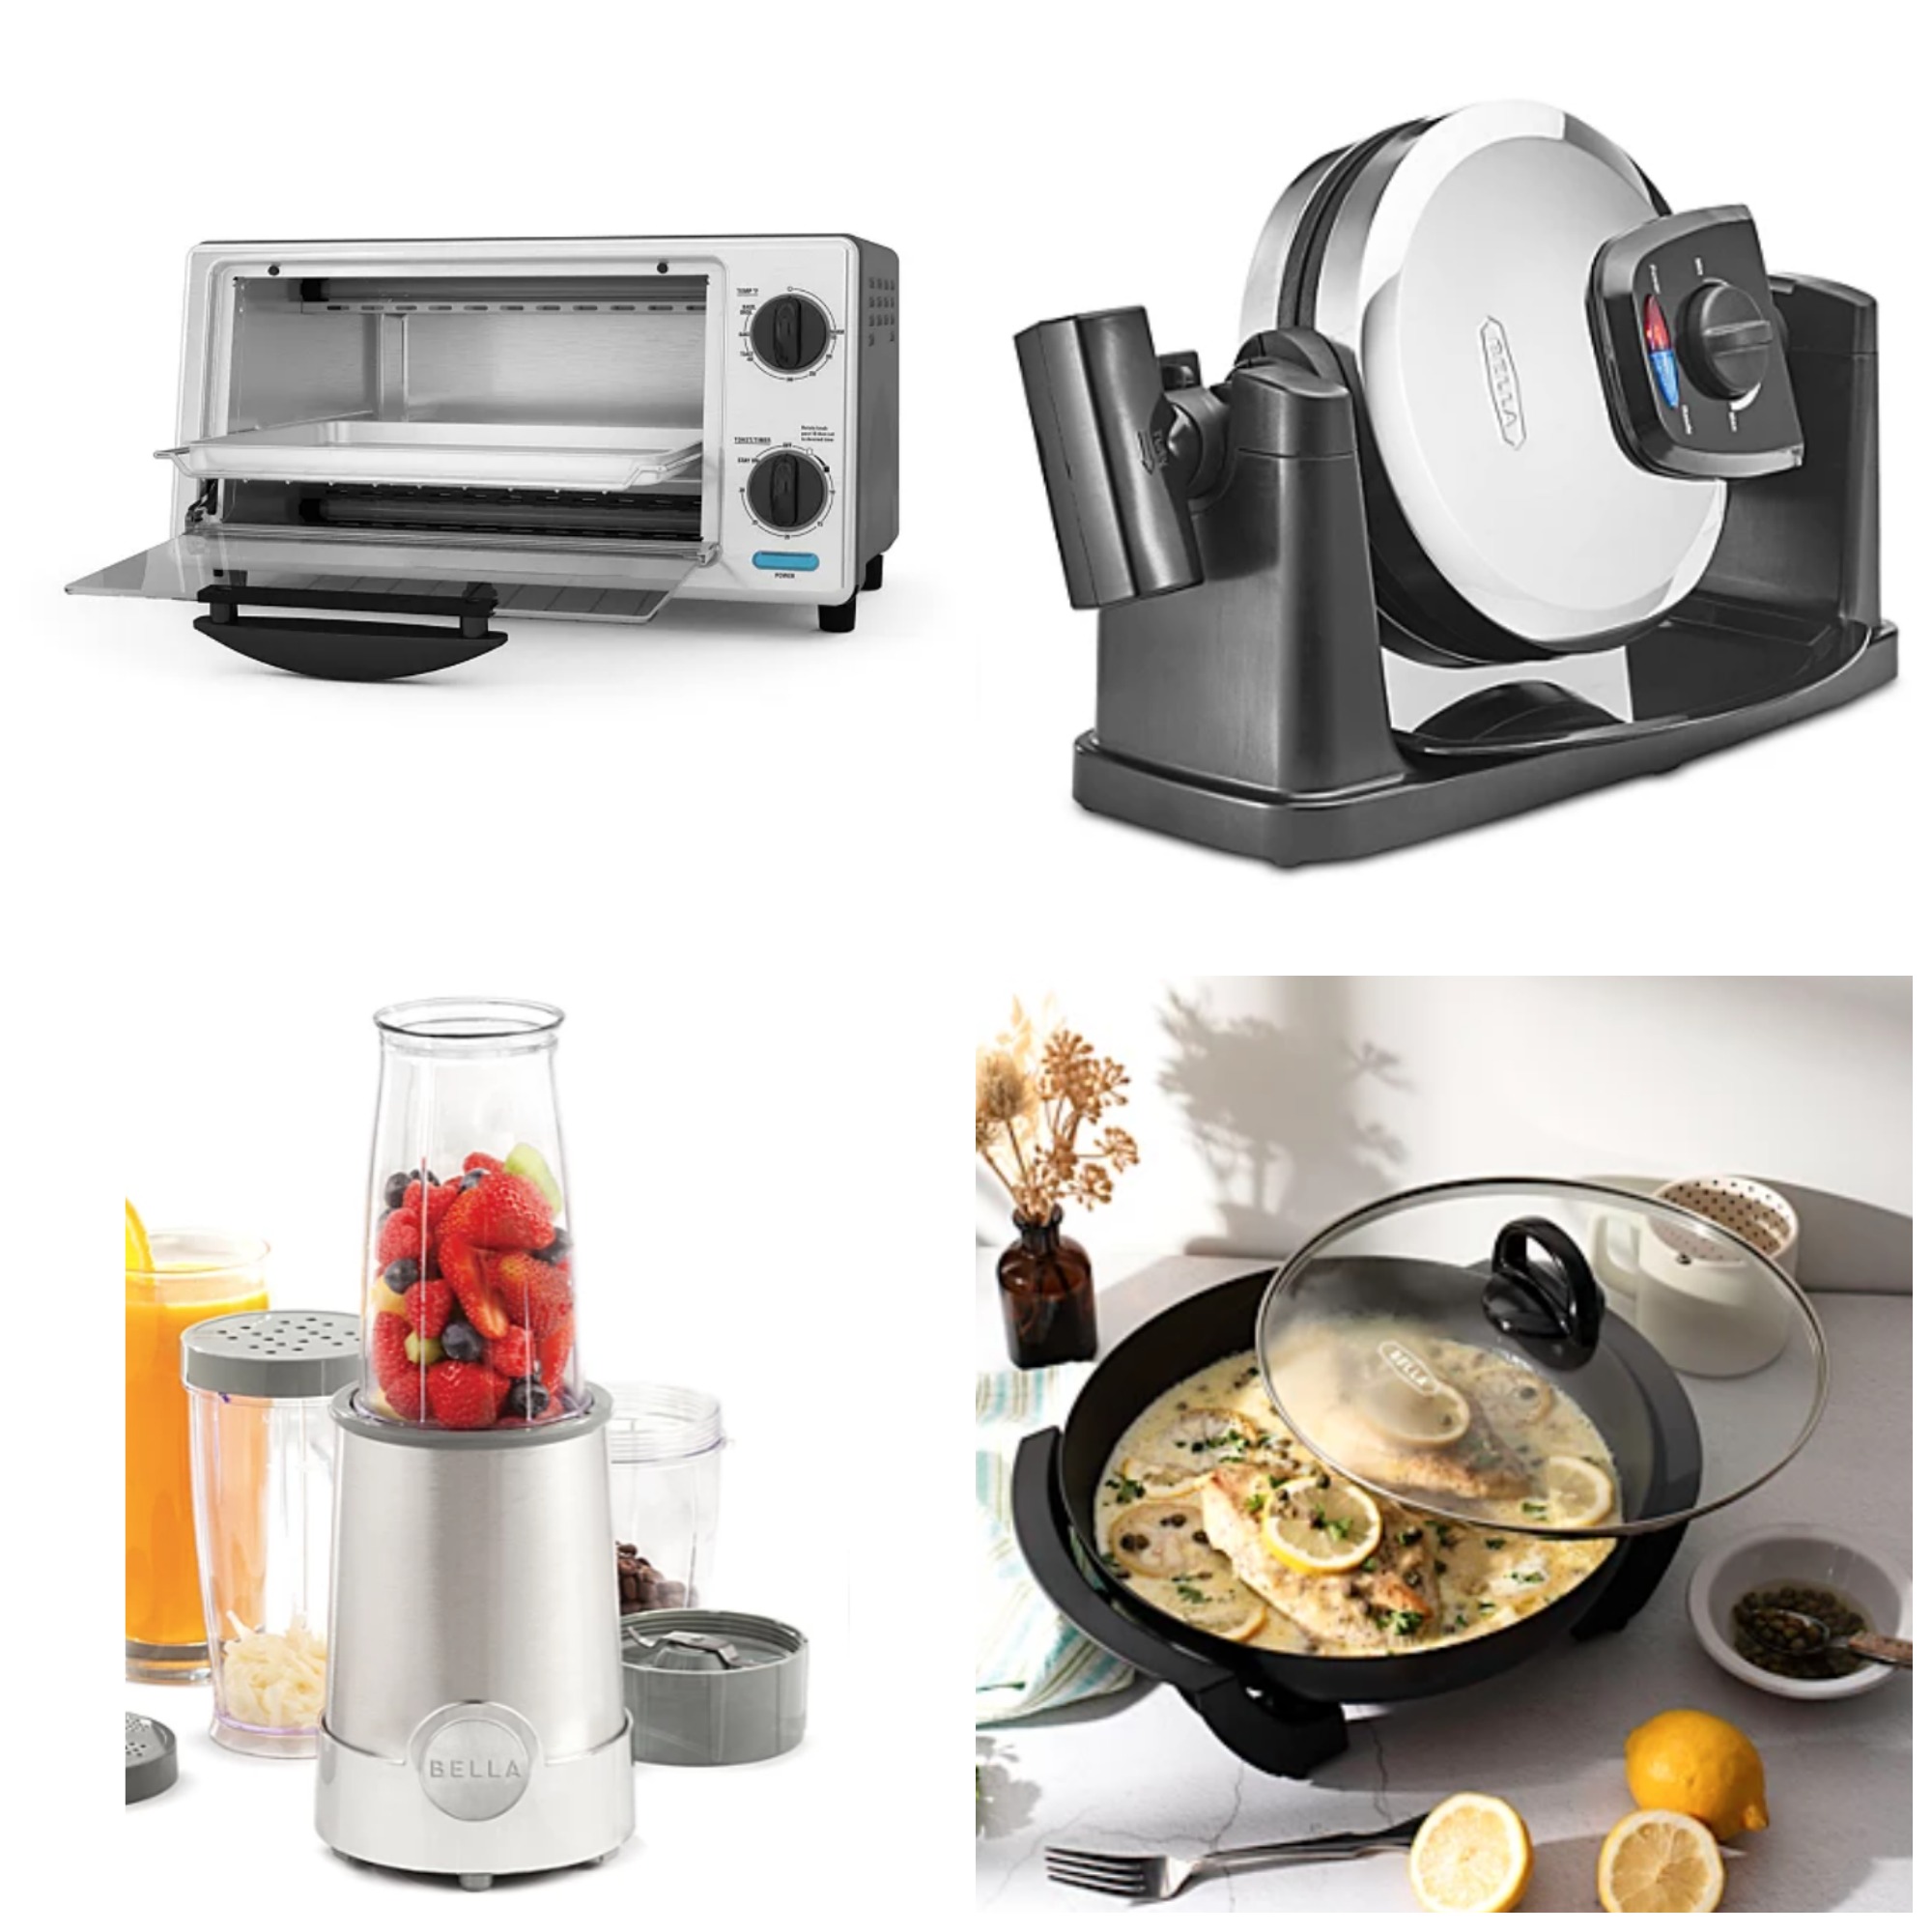 Macys Bella Small Kitchen Appliances Only 799 After Rebate